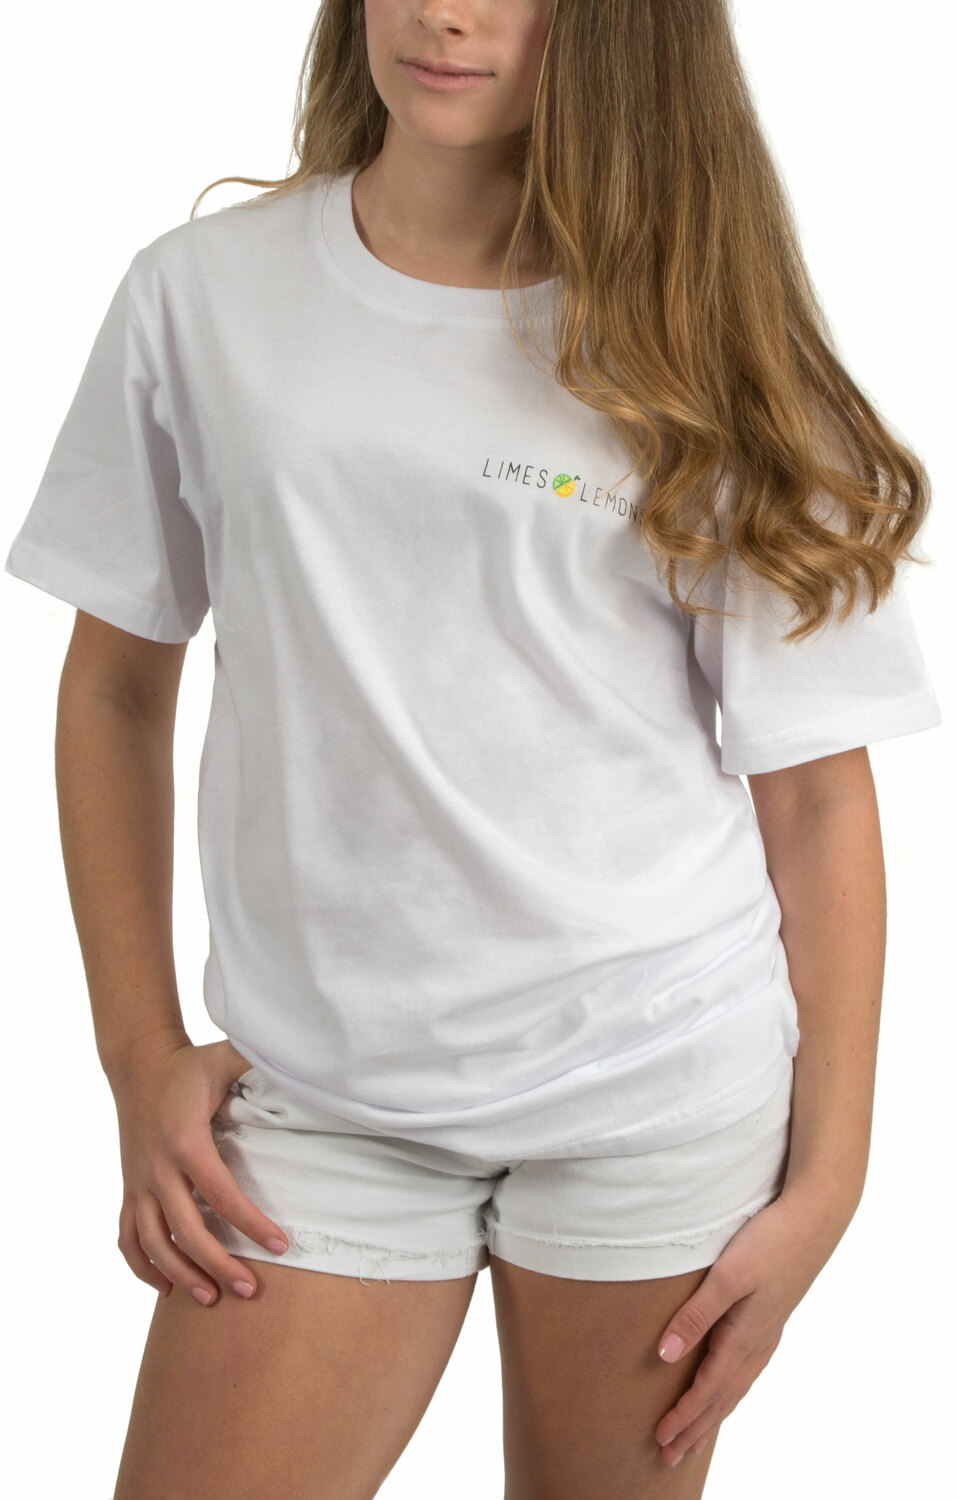 Keep Life Zesty by Livin' on the Wedge - Keep Life Zesty - S- 100% Cotton Soft Wash Unisex T-Shirt